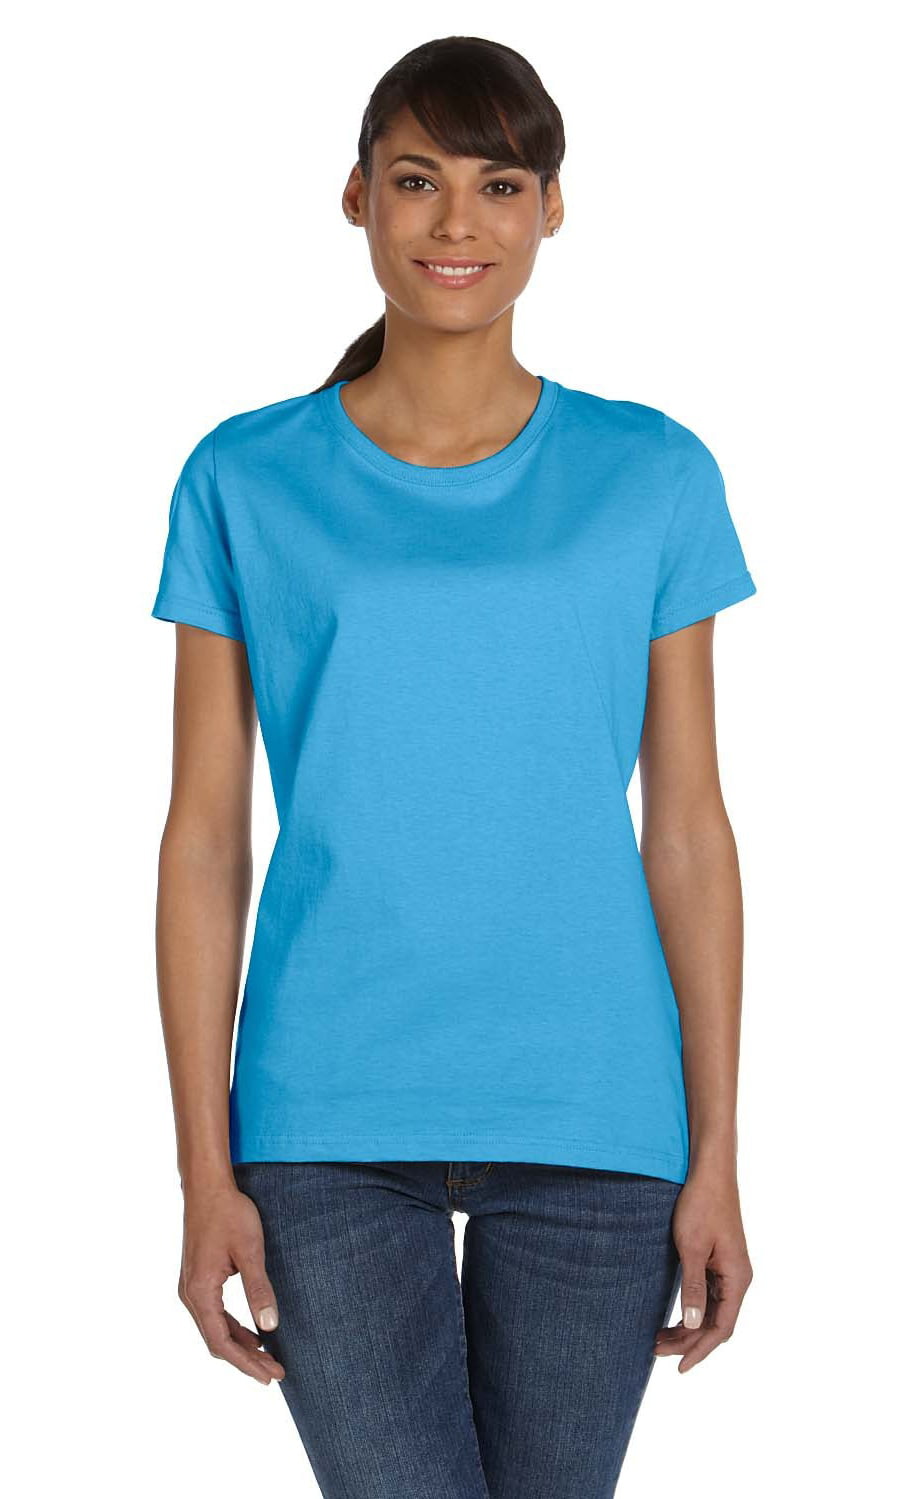 Fruit of the Loom - The Fruit of the Loom Ladies 5 oz HD Cotton T-Shirt ...